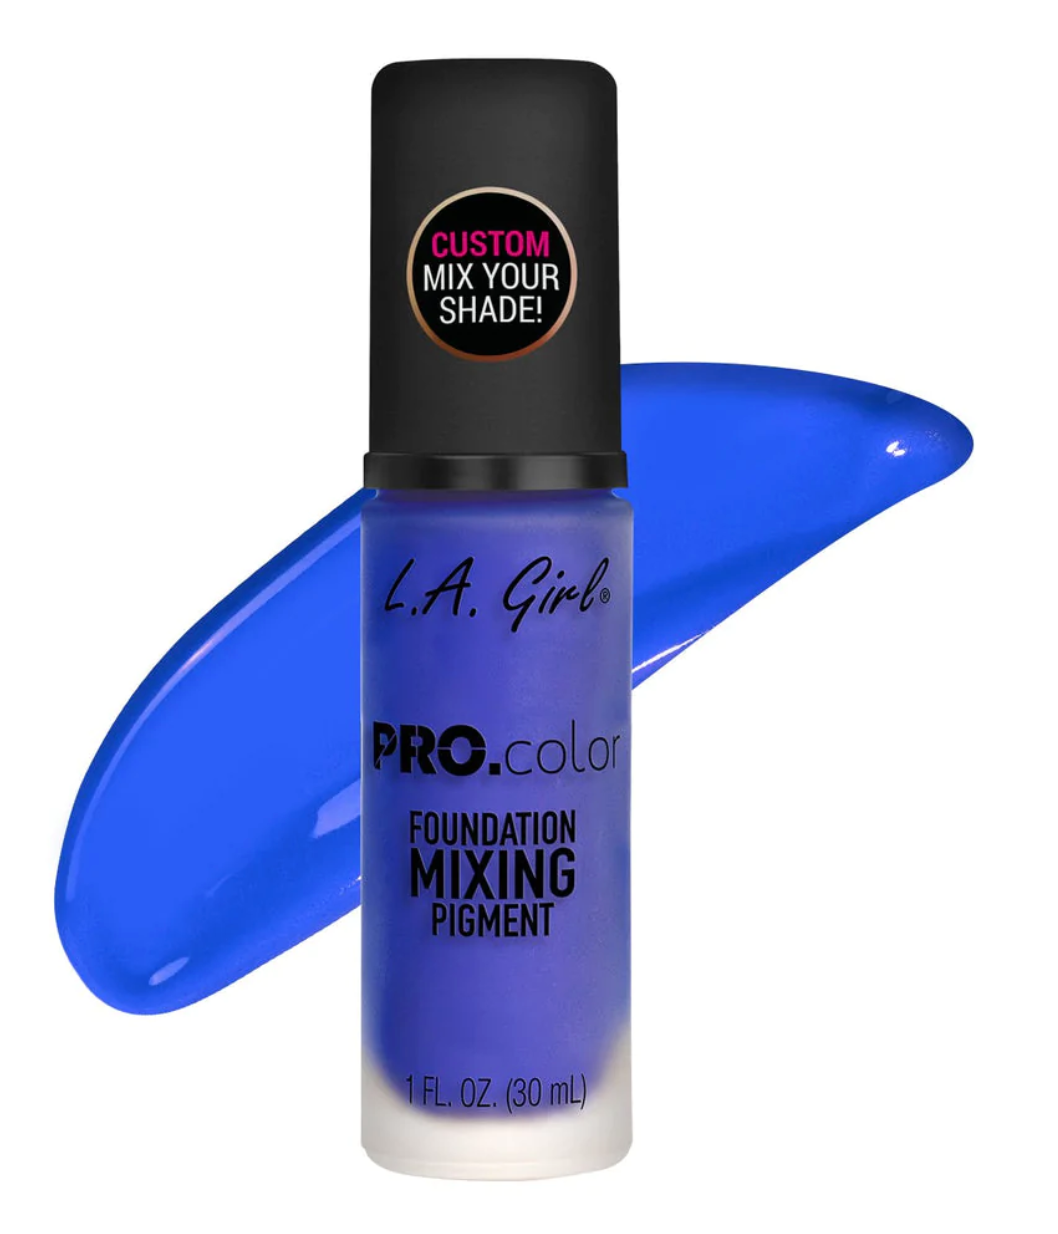 PRO.color Foundation Mixing Pigments